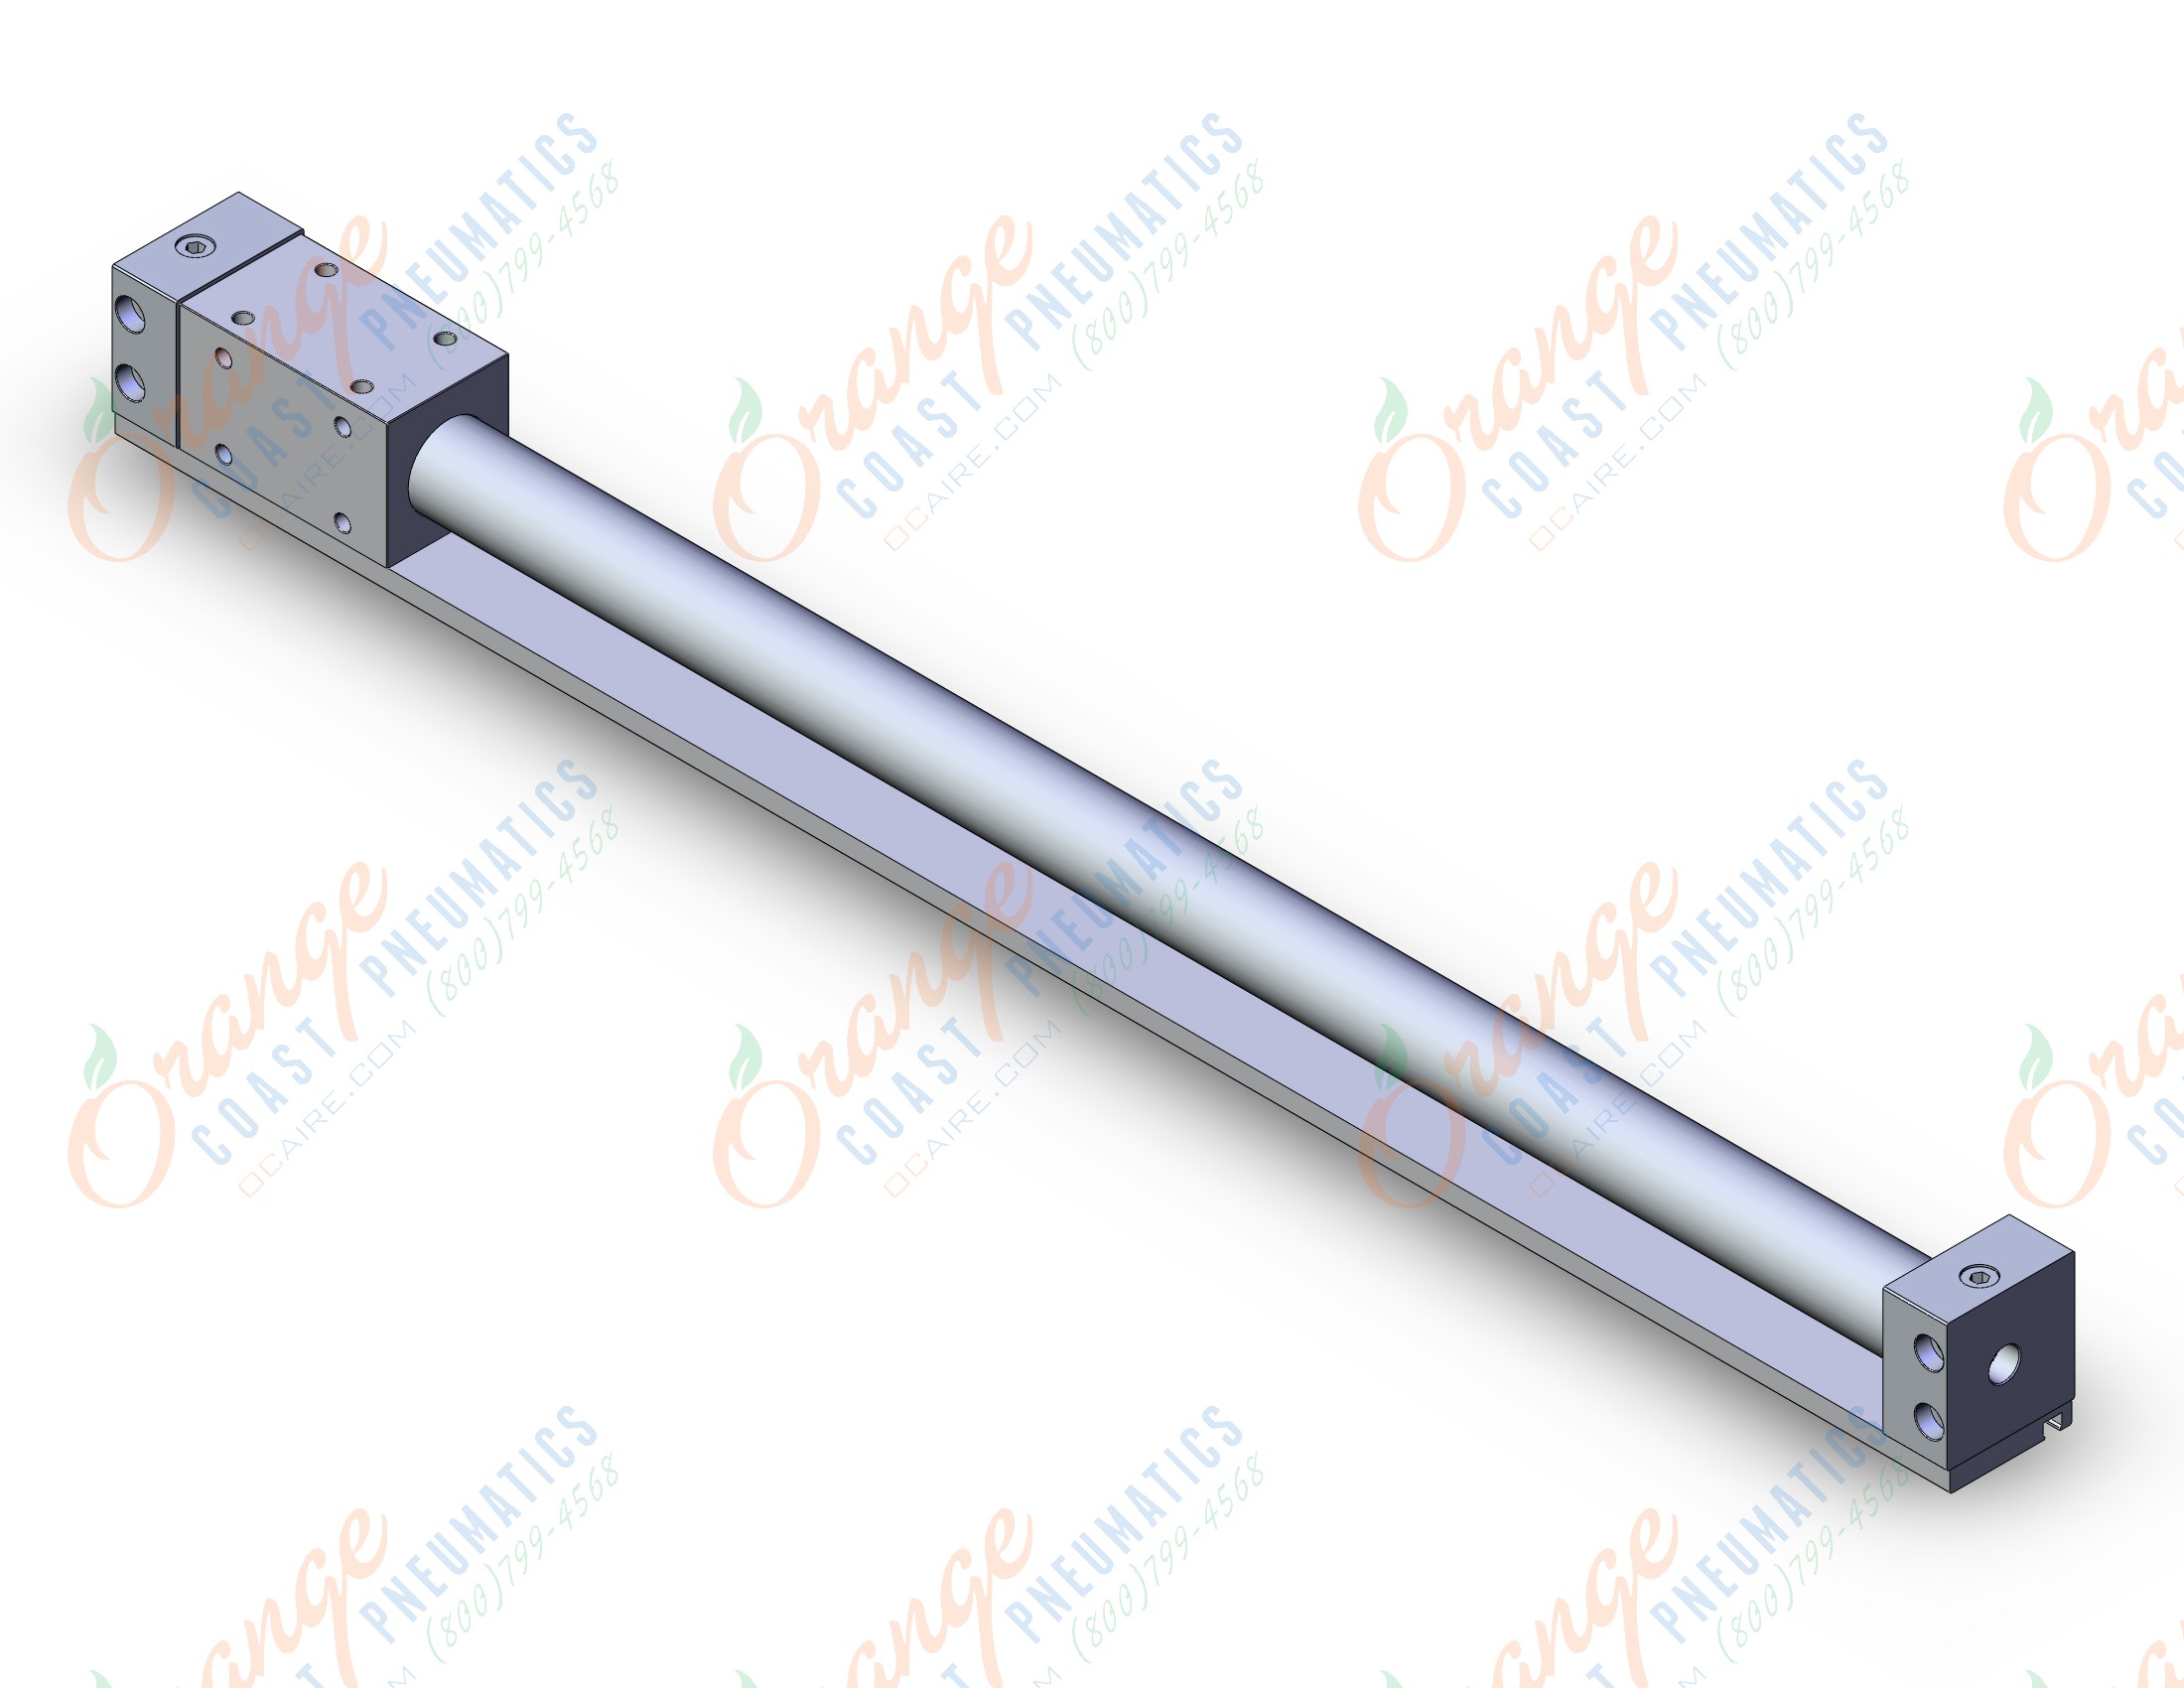 SMC CY3R25TN-500-Y7PZ cy3, magnet coupled rodless cylinder, RODLESS CYLINDER